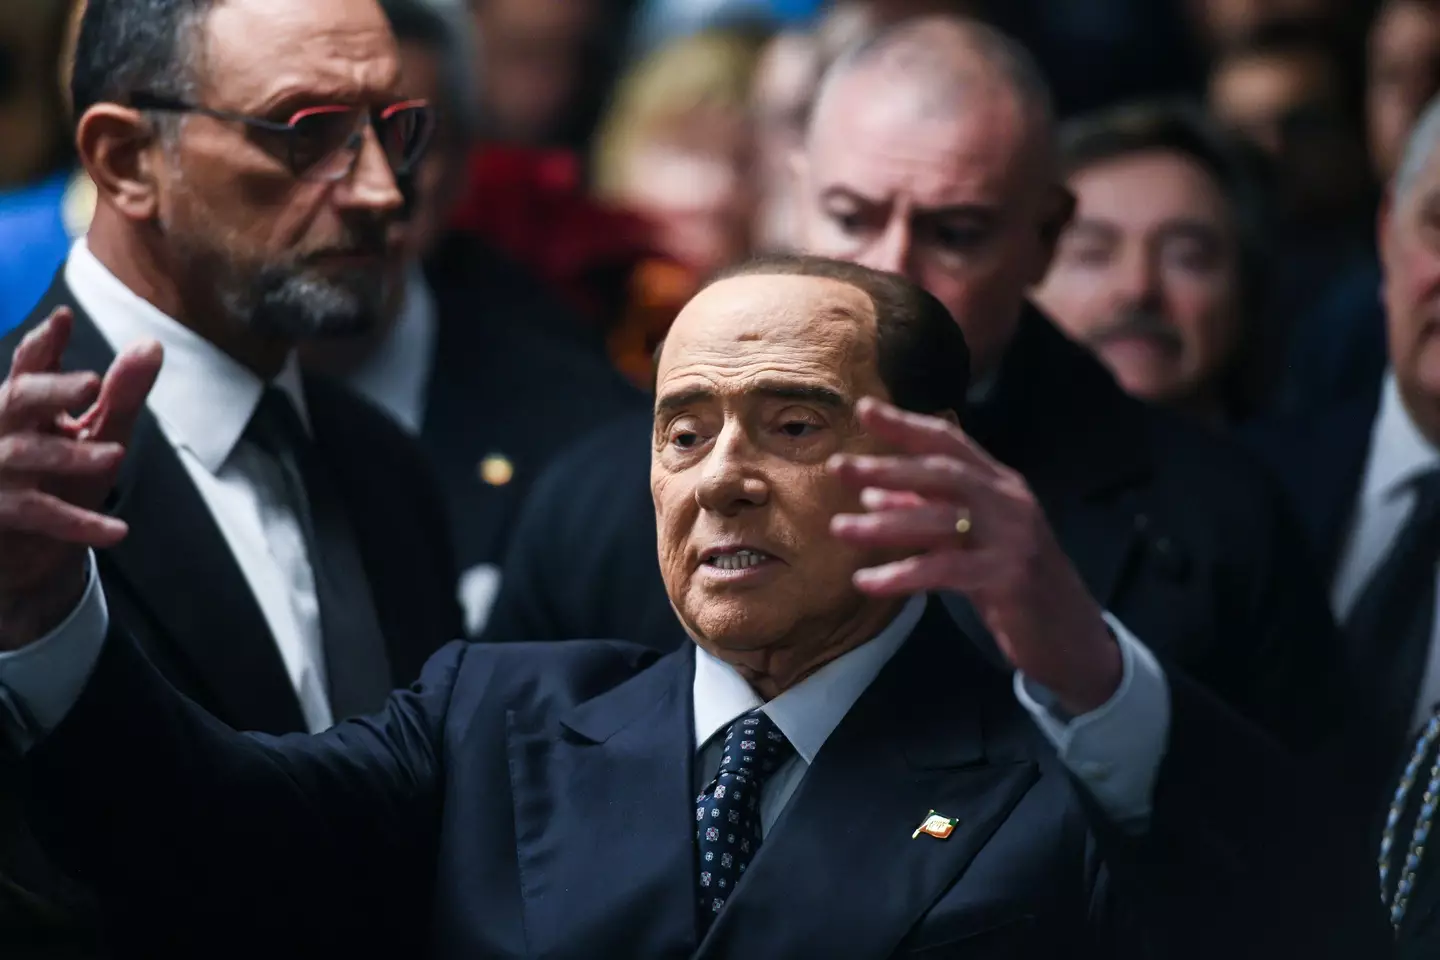 Berlusconi's comment did not go down that well. Image: Alamy